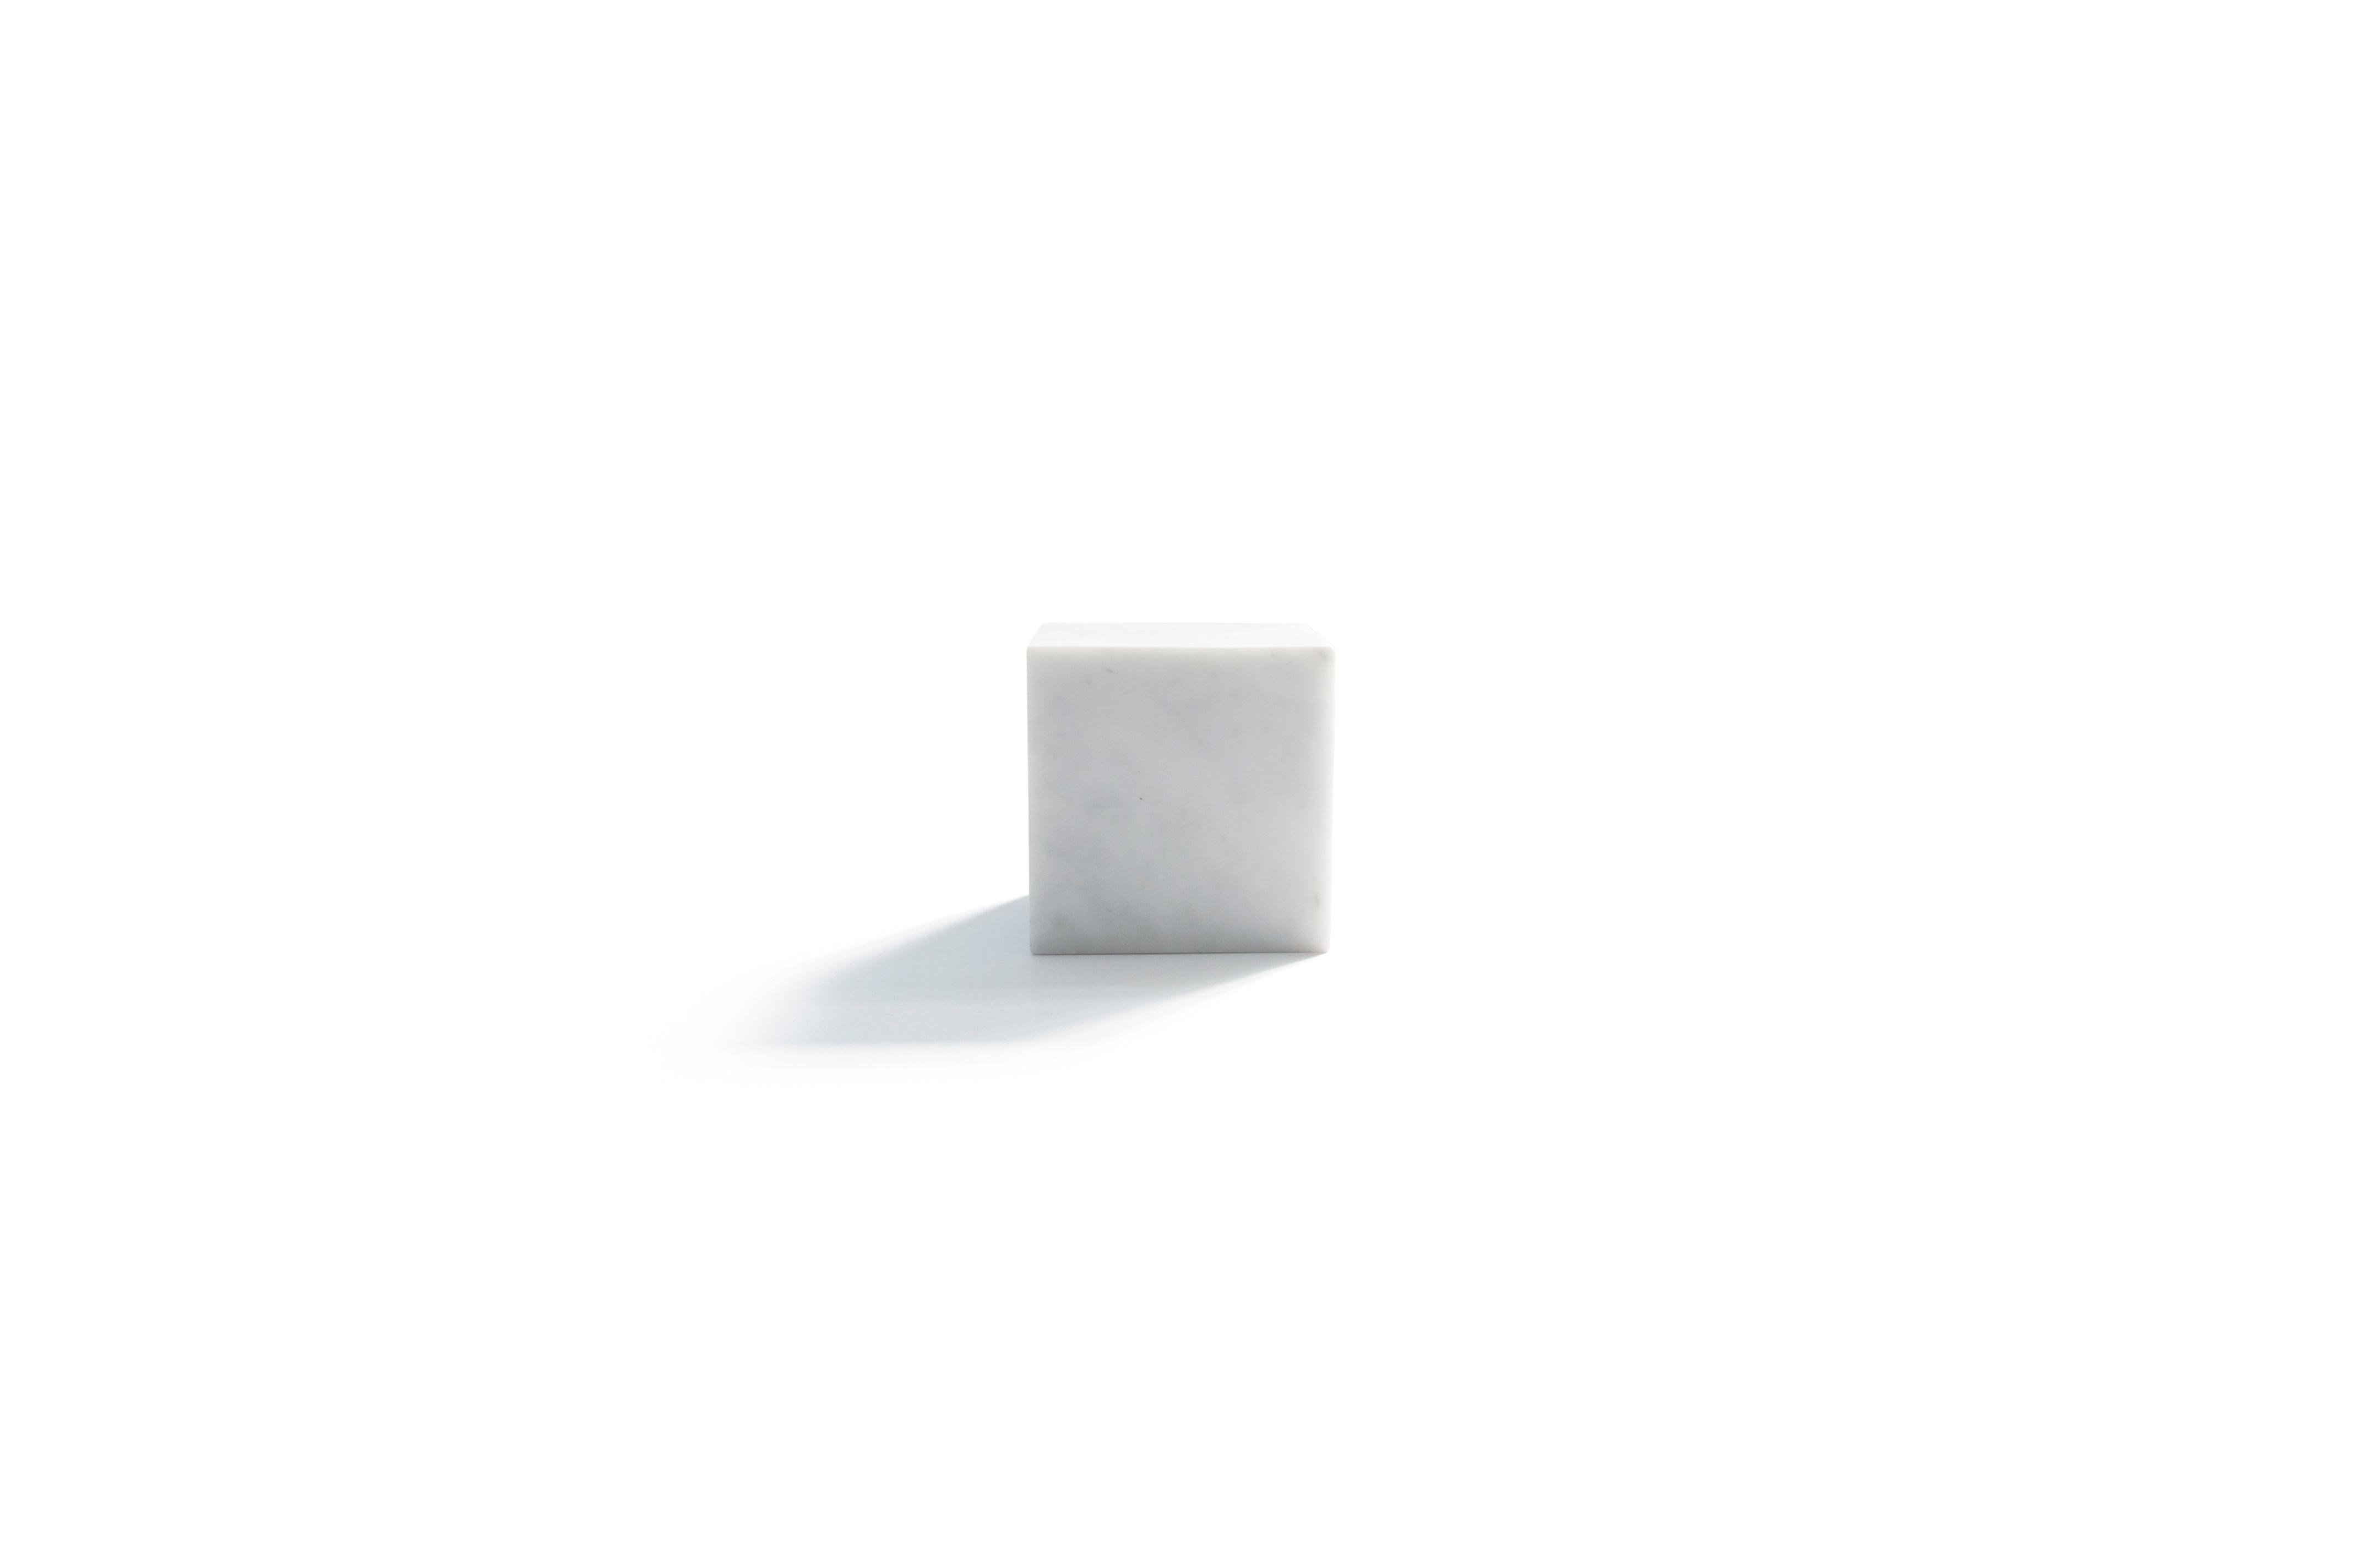 Hand-Crafted Handmade Big Decorative Paperweight Cube in Satin White Carrara Marble For Sale